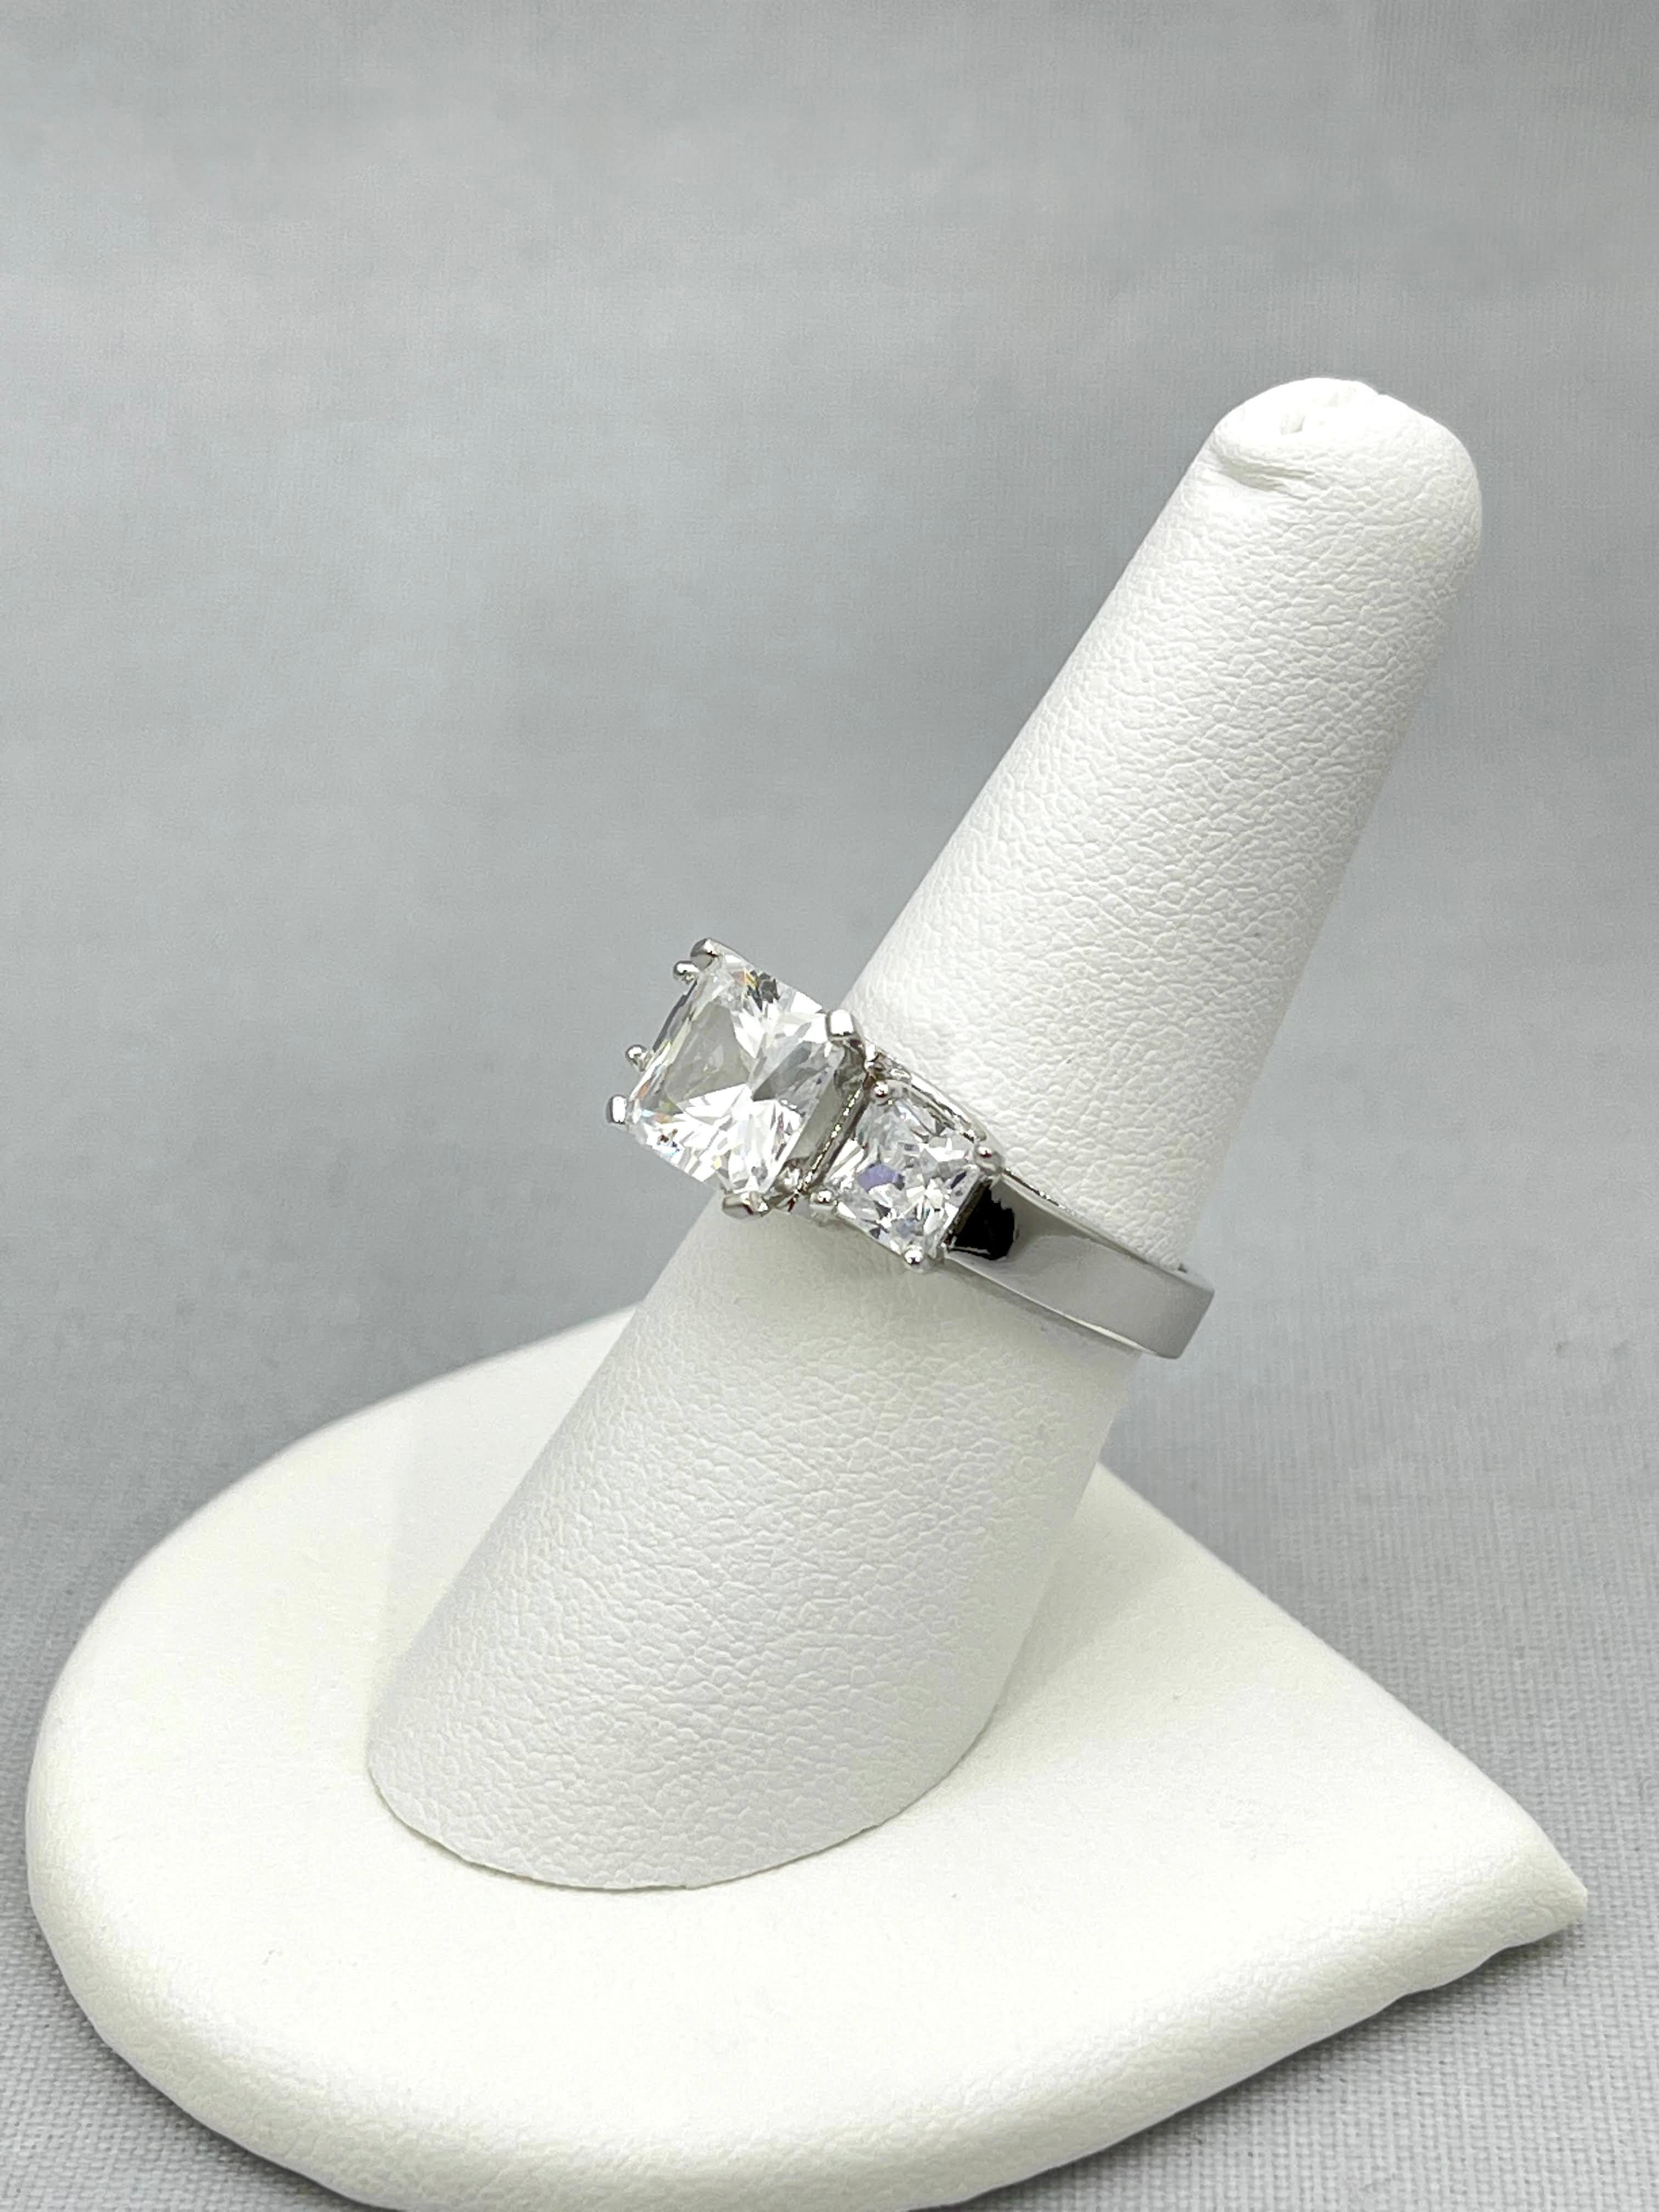 Triple Square Engagement Ring - Kollection by Kauriel